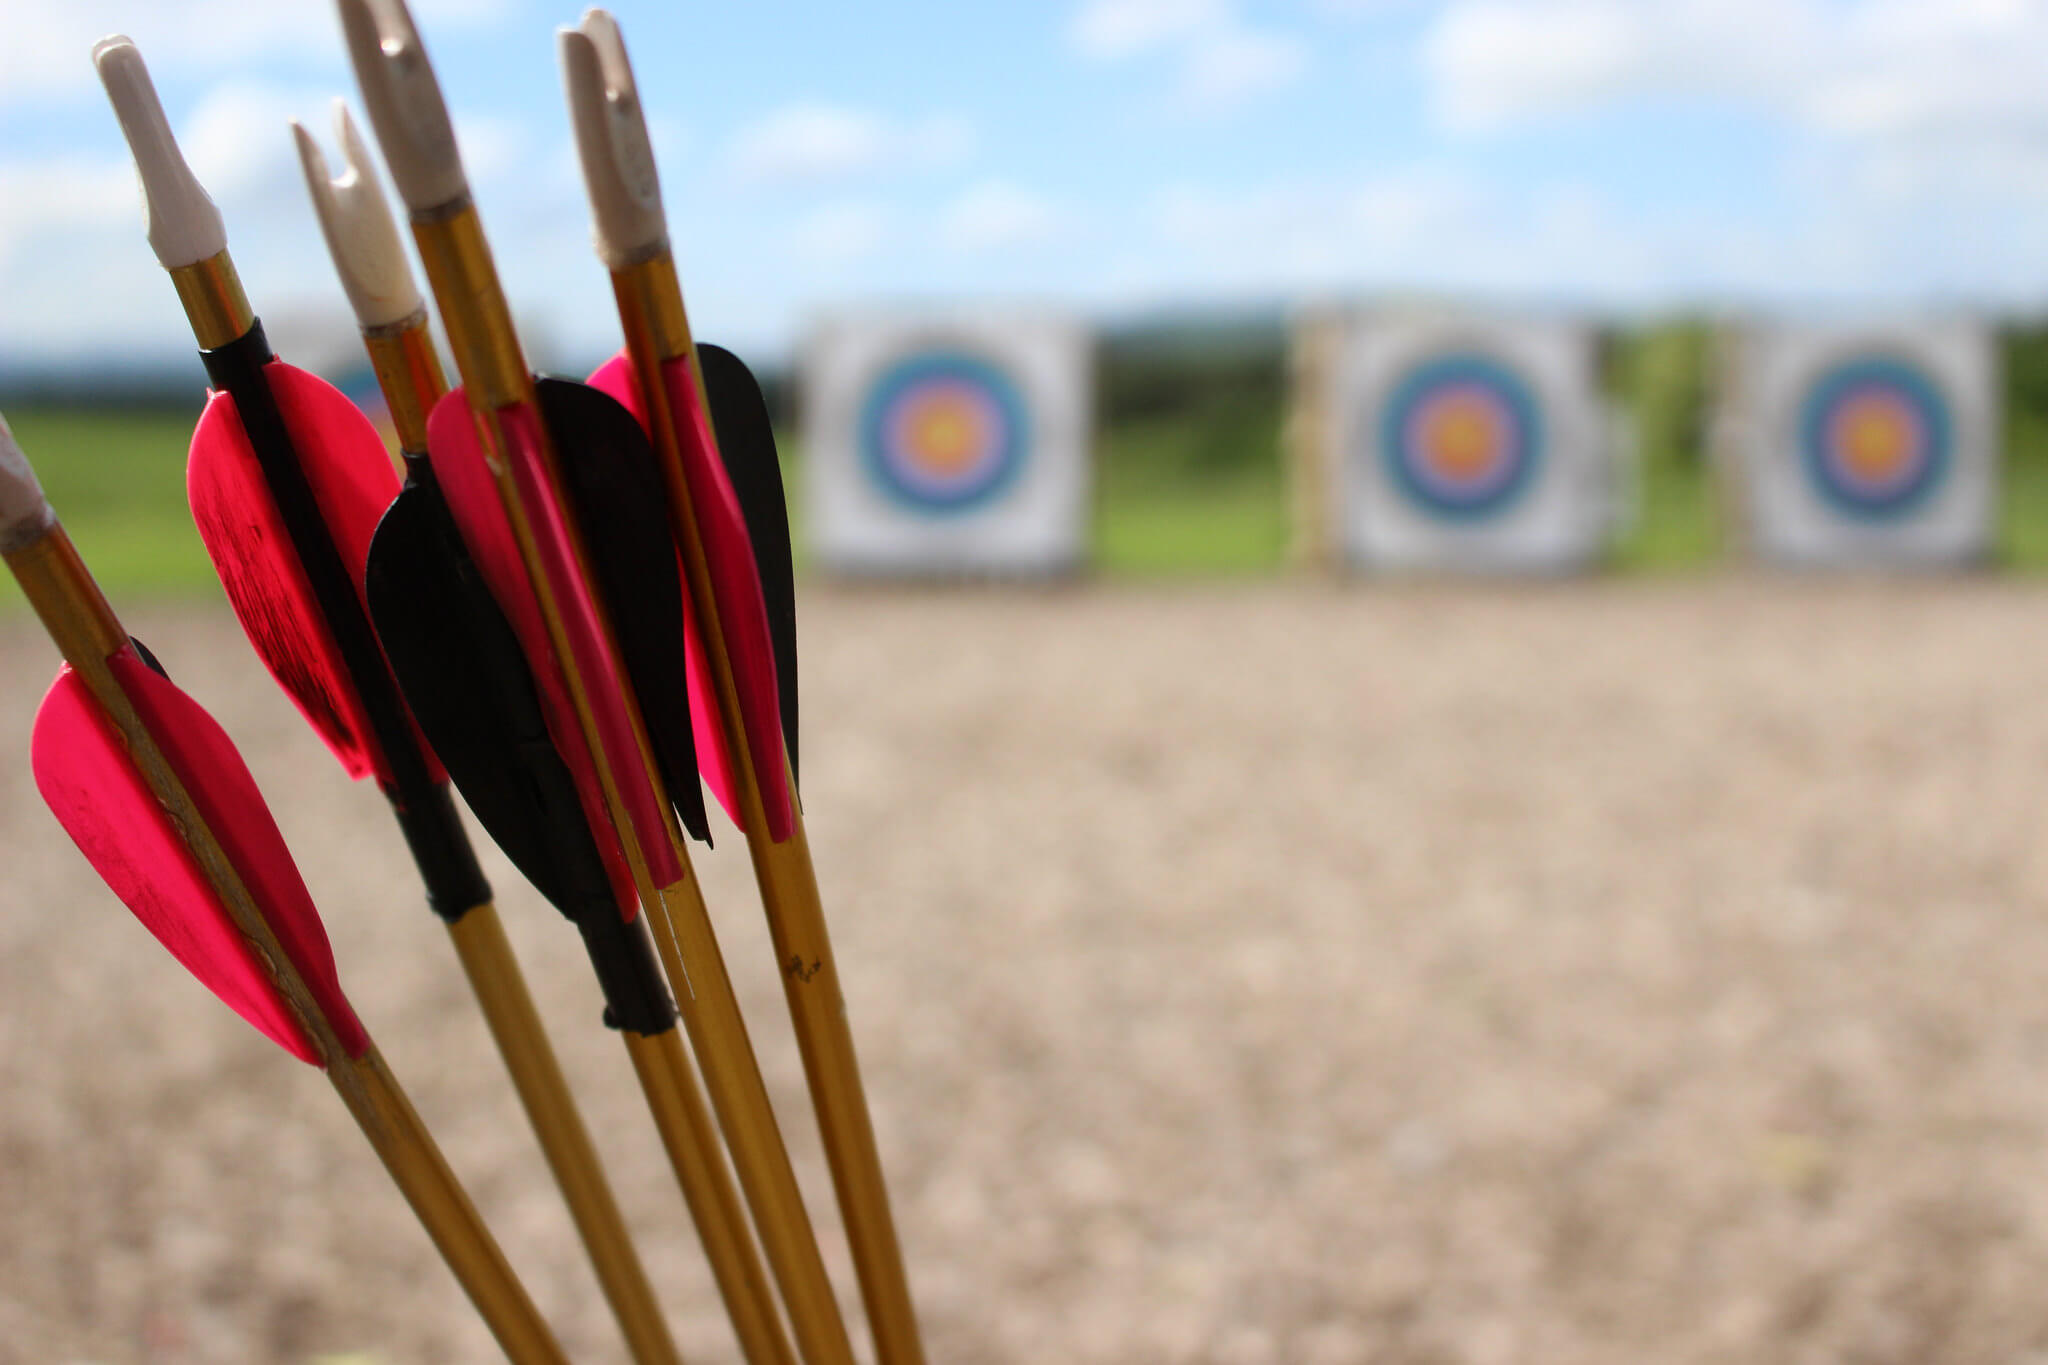 Arrows in front of targets